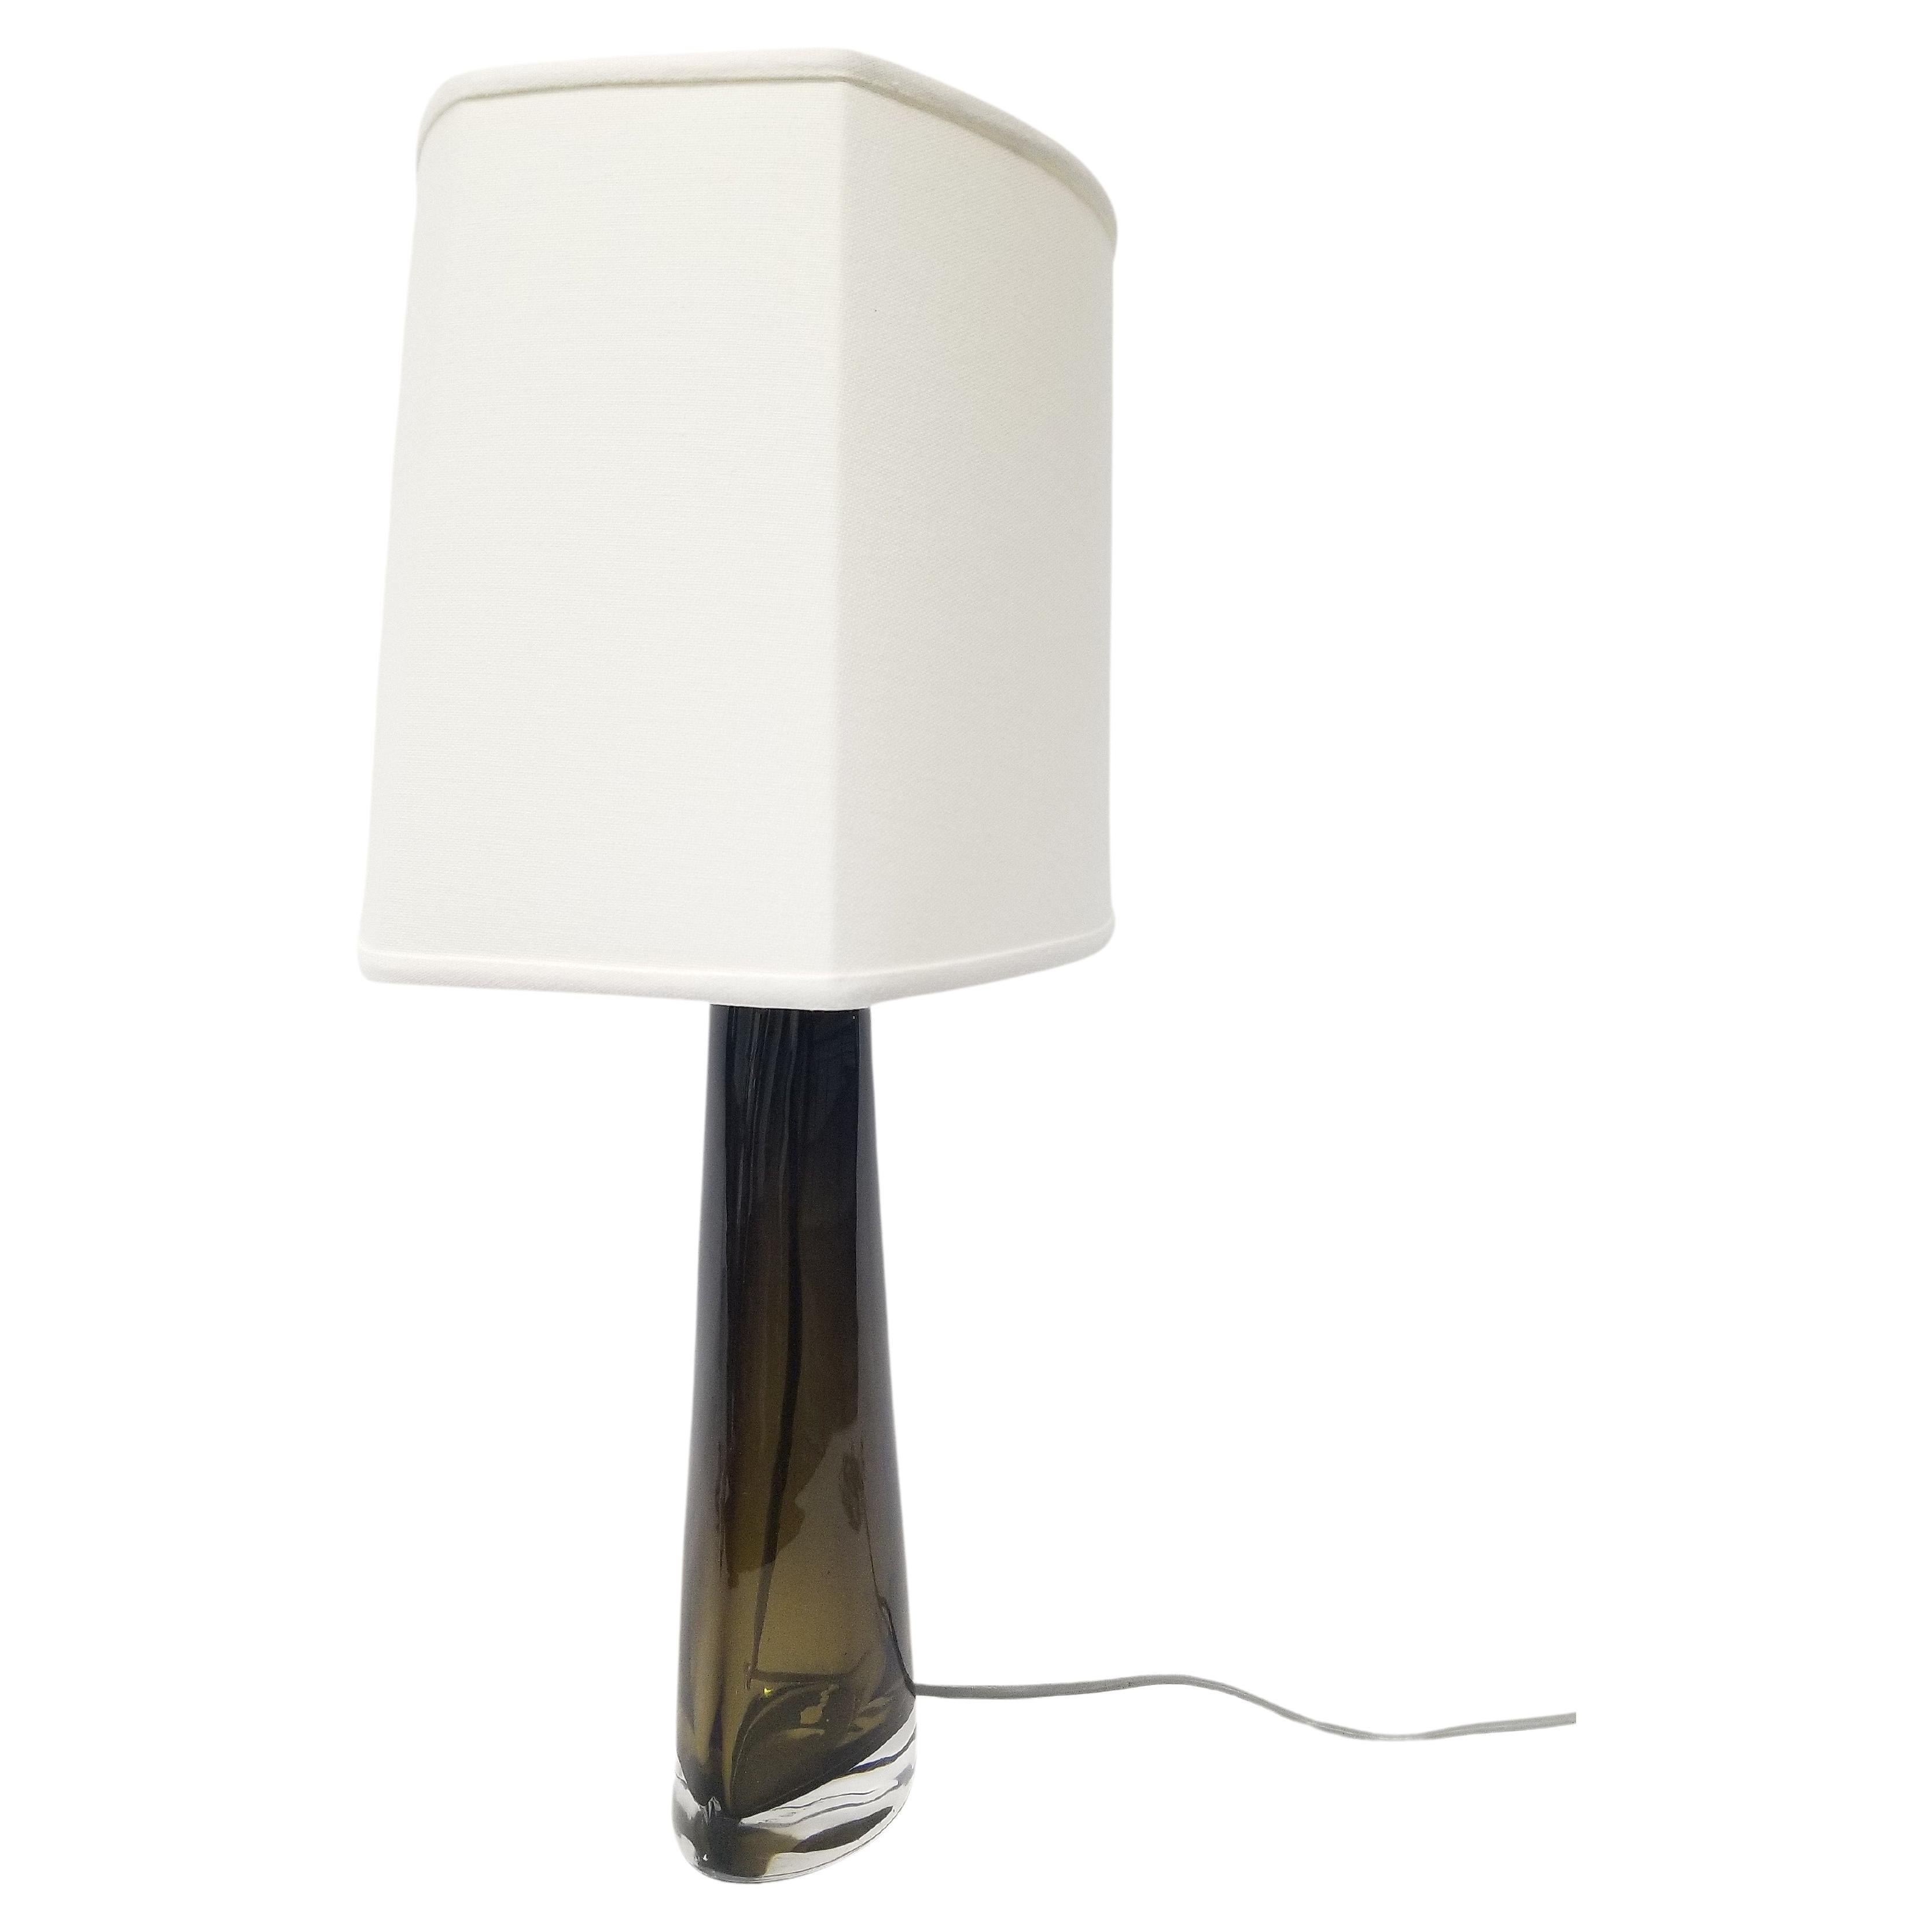 A glass conical table lamp designed by Carl Fagerlund for Orrefors, Sweden, circa 1950s. The lamp features handblown glass in a beautiful smokey olive green hue and a new shade. The custom white shade is uniquely shaped to complement the sleek lines